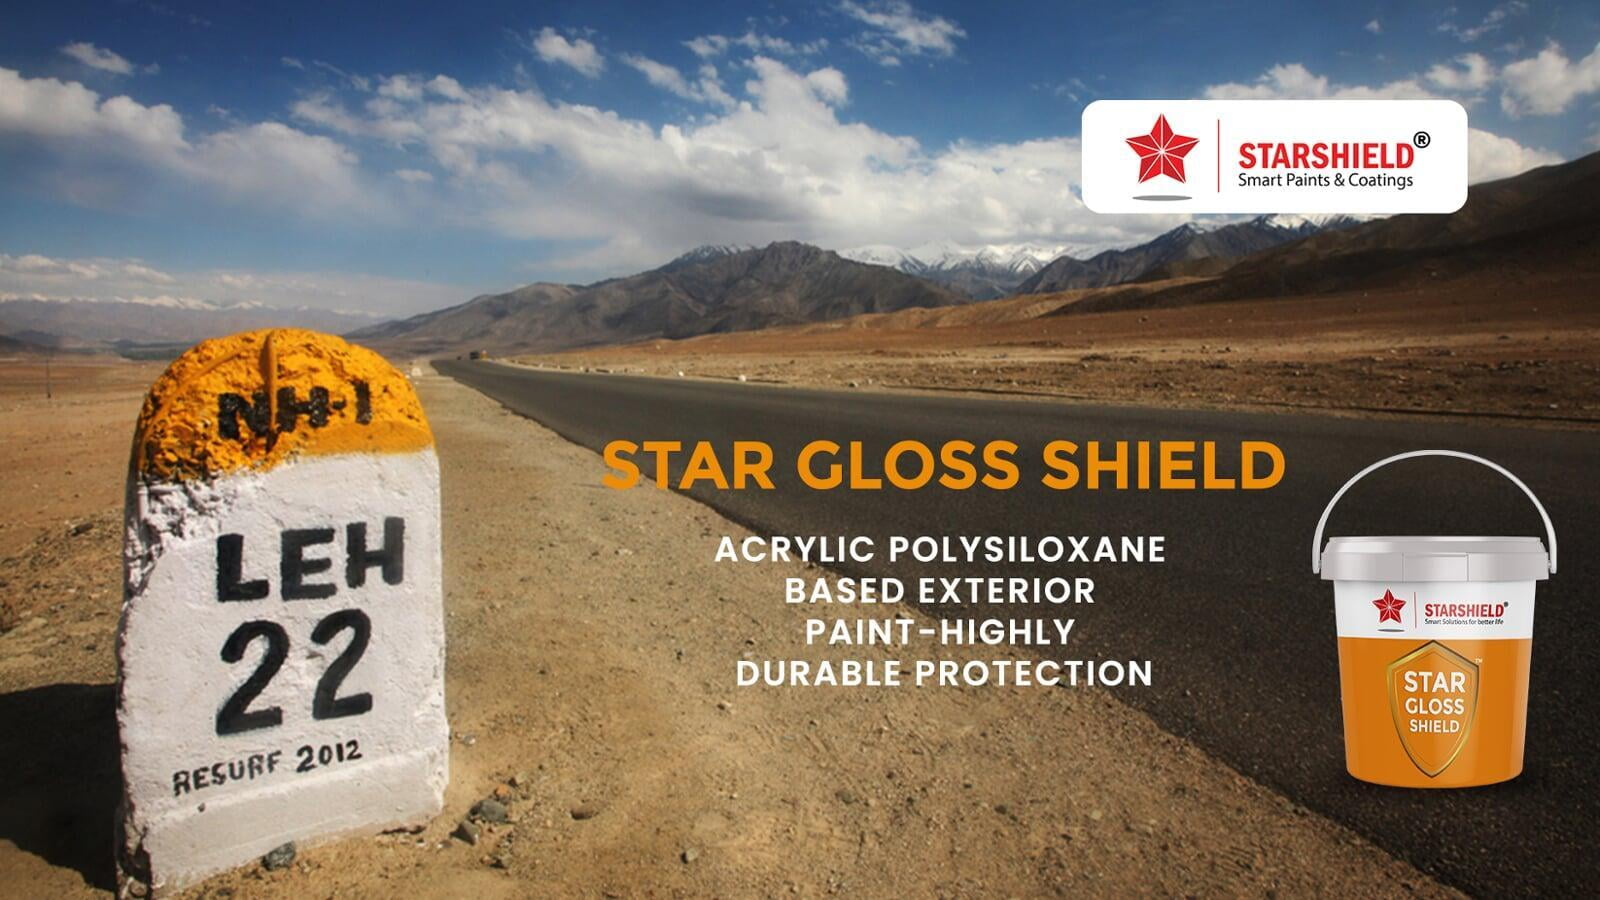 Star Gloss Shield: Nano-technology composite polymeric coating. Gloss paint and protective shield.